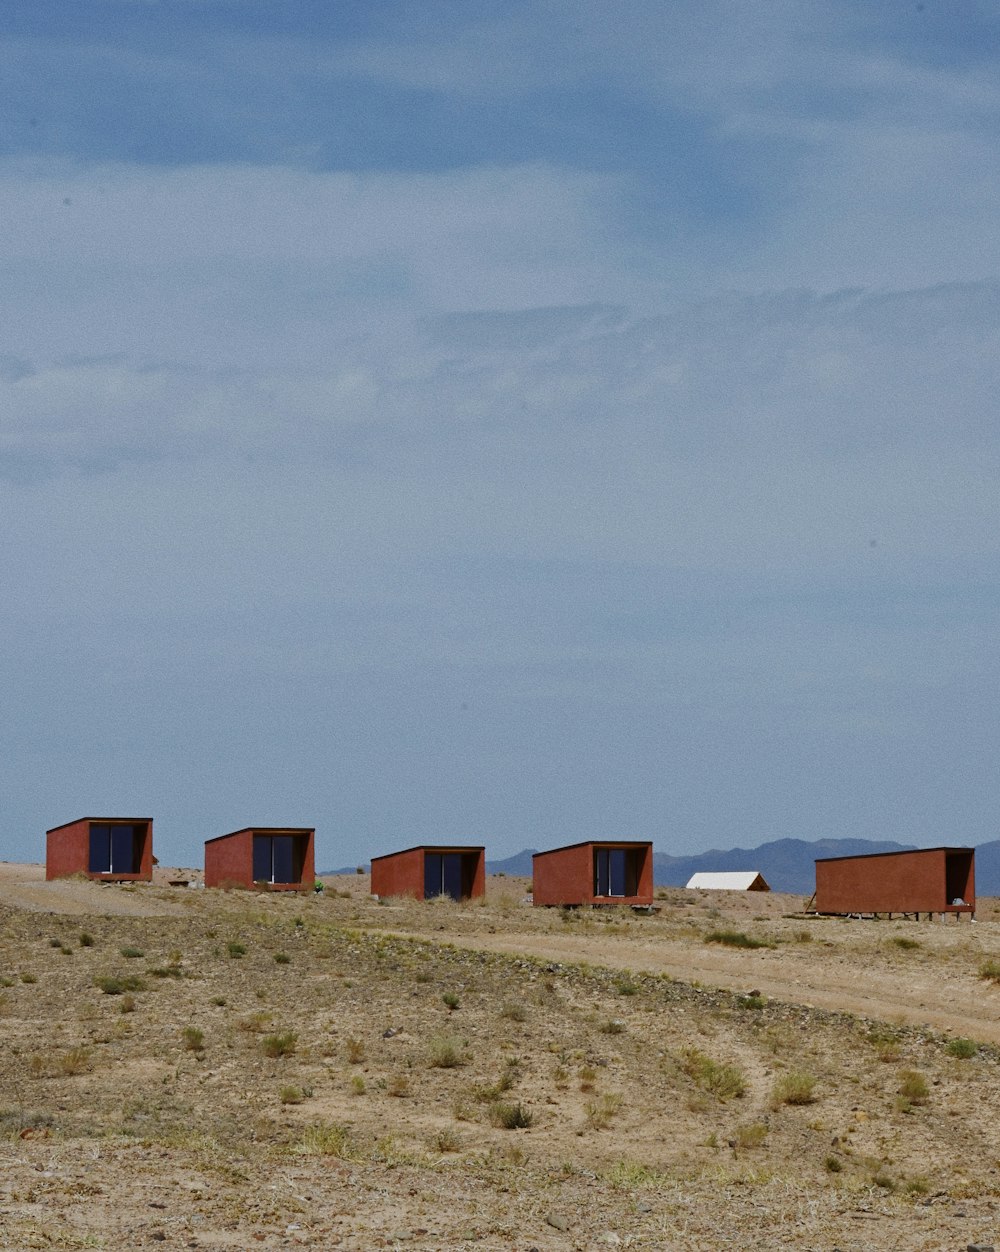 a row of red buildings sitting on top of a dry grass field